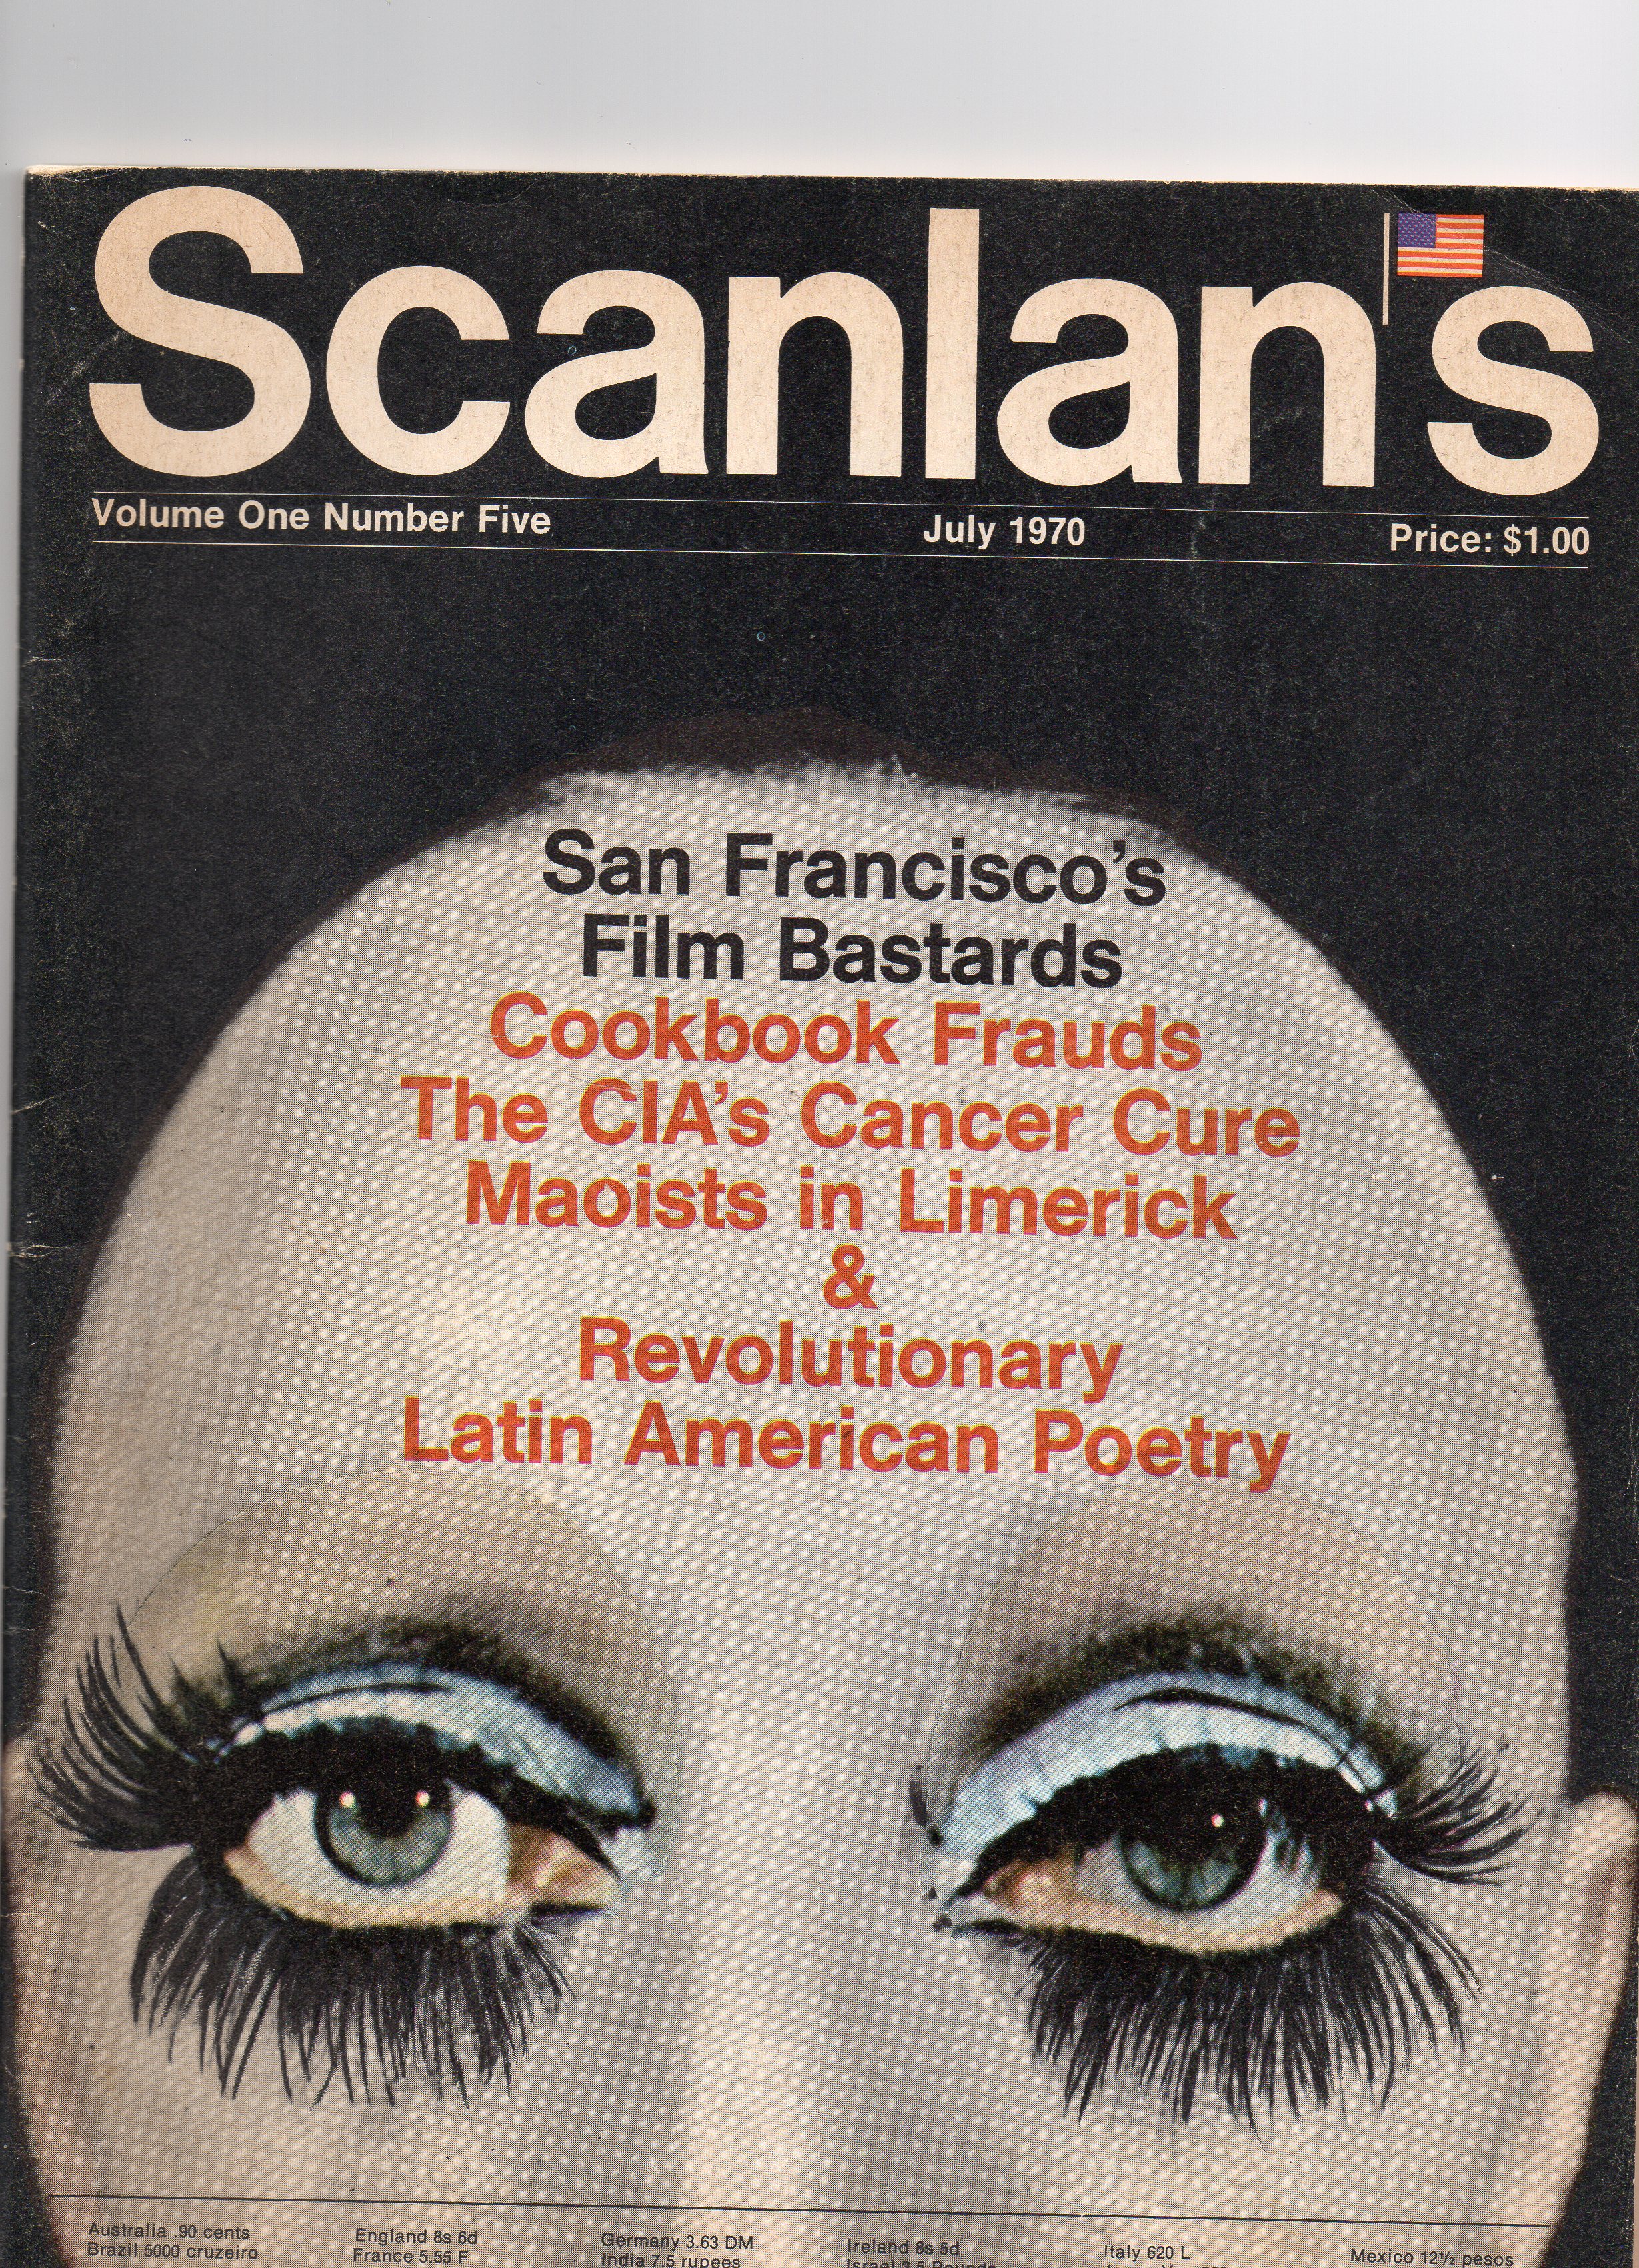 Scanlan’s Monthly 5, July 1970, from my personal collection